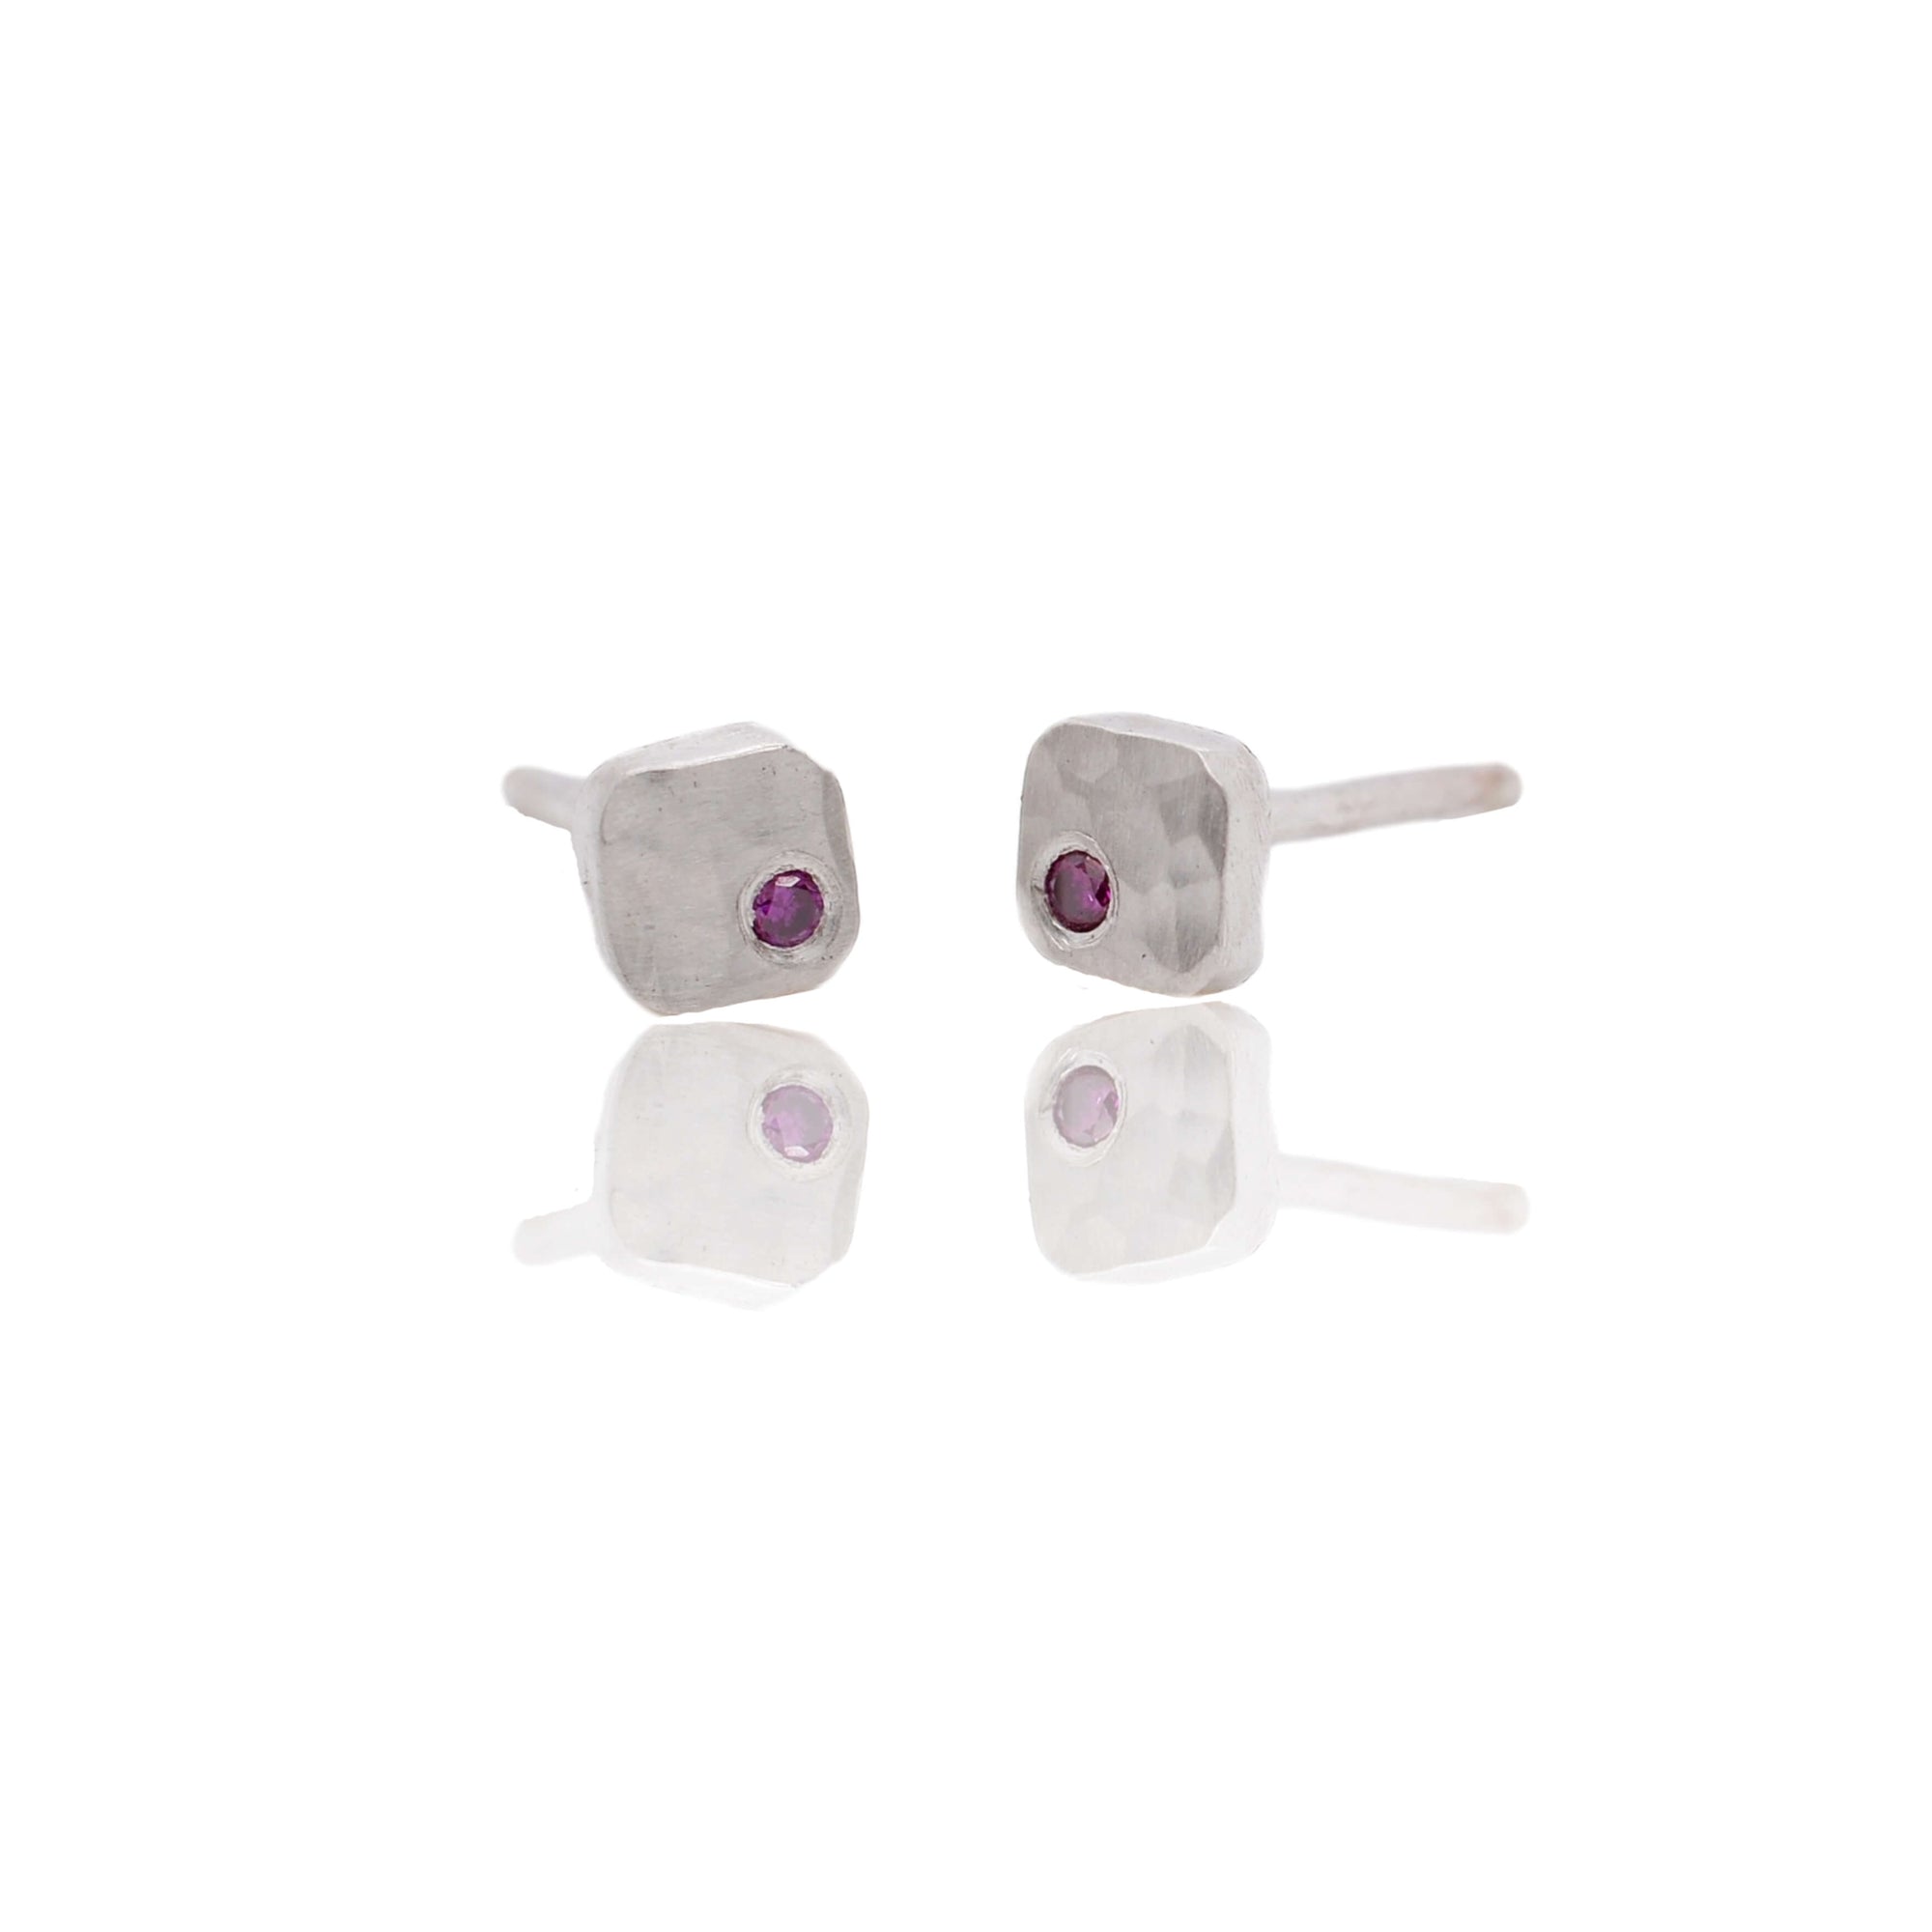 Hammered sterling silver studs with purple diamonds. Handmade with recycled metal and conflict-free stones.